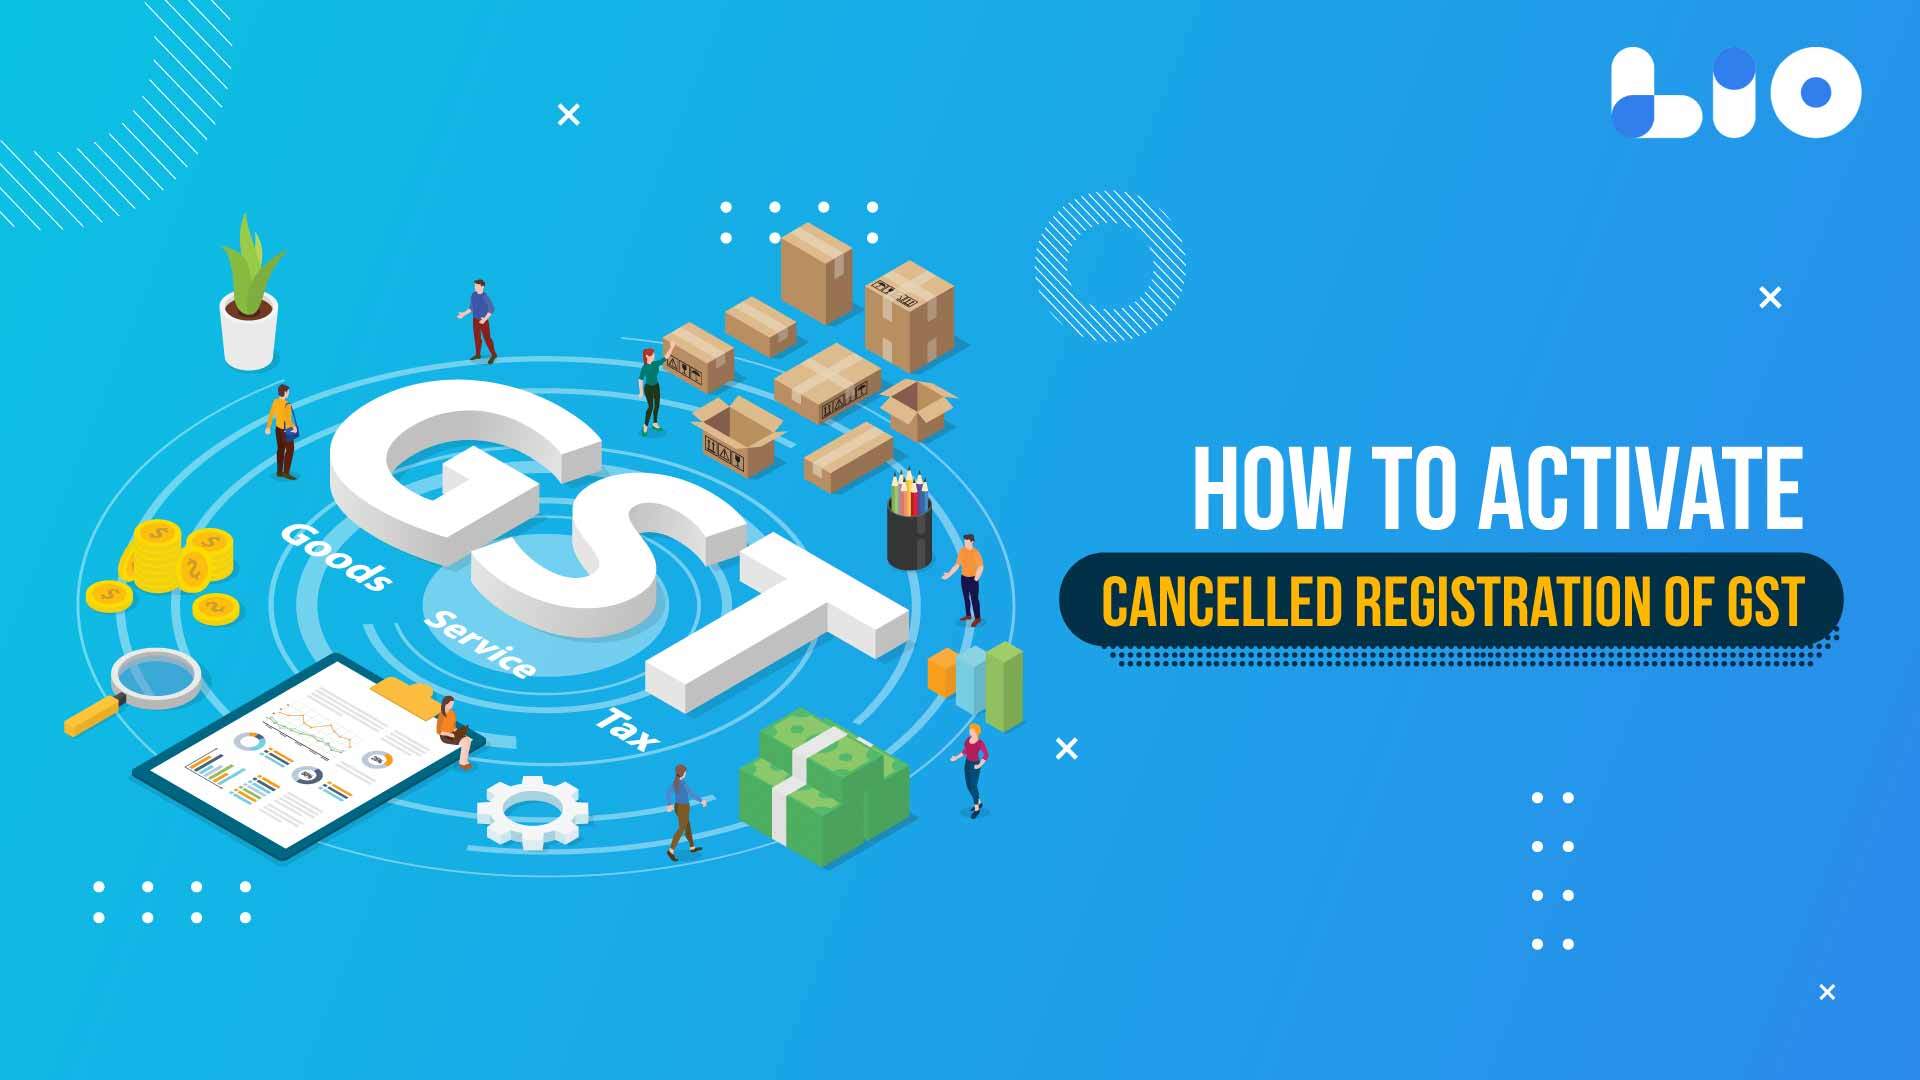 Activate Cancelled Registration Of GST